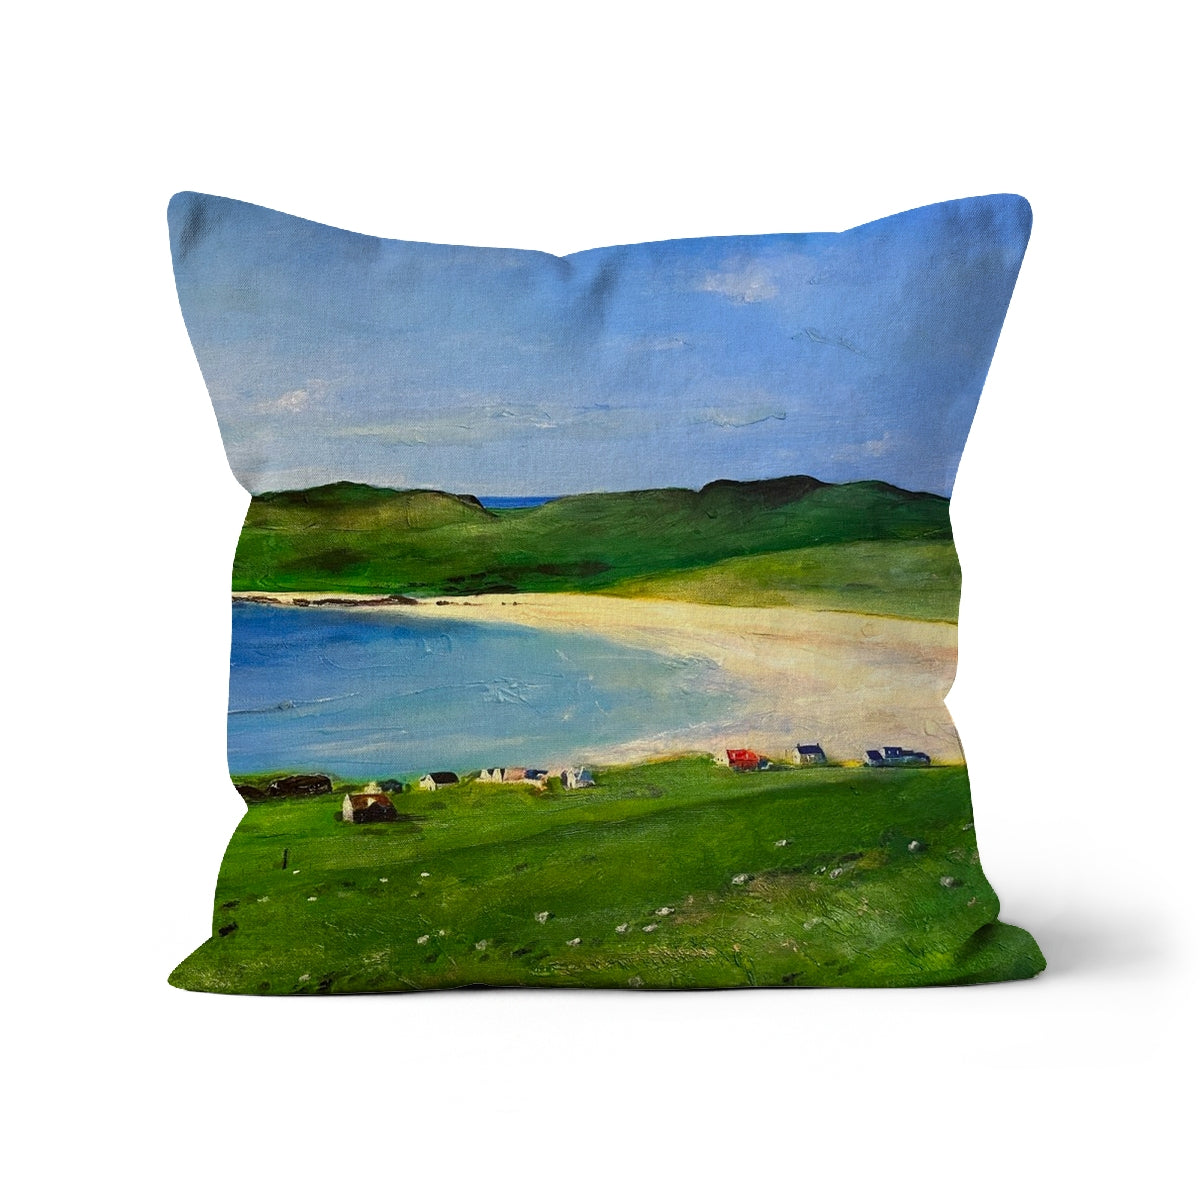 Balephuil Beach Tiree Art Gifts Cushion-Cushions-Hebridean Islands Art Gallery-Canvas-18"x18"-Paintings, Prints, Homeware, Art Gifts From Scotland By Scottish Artist Kevin Hunter